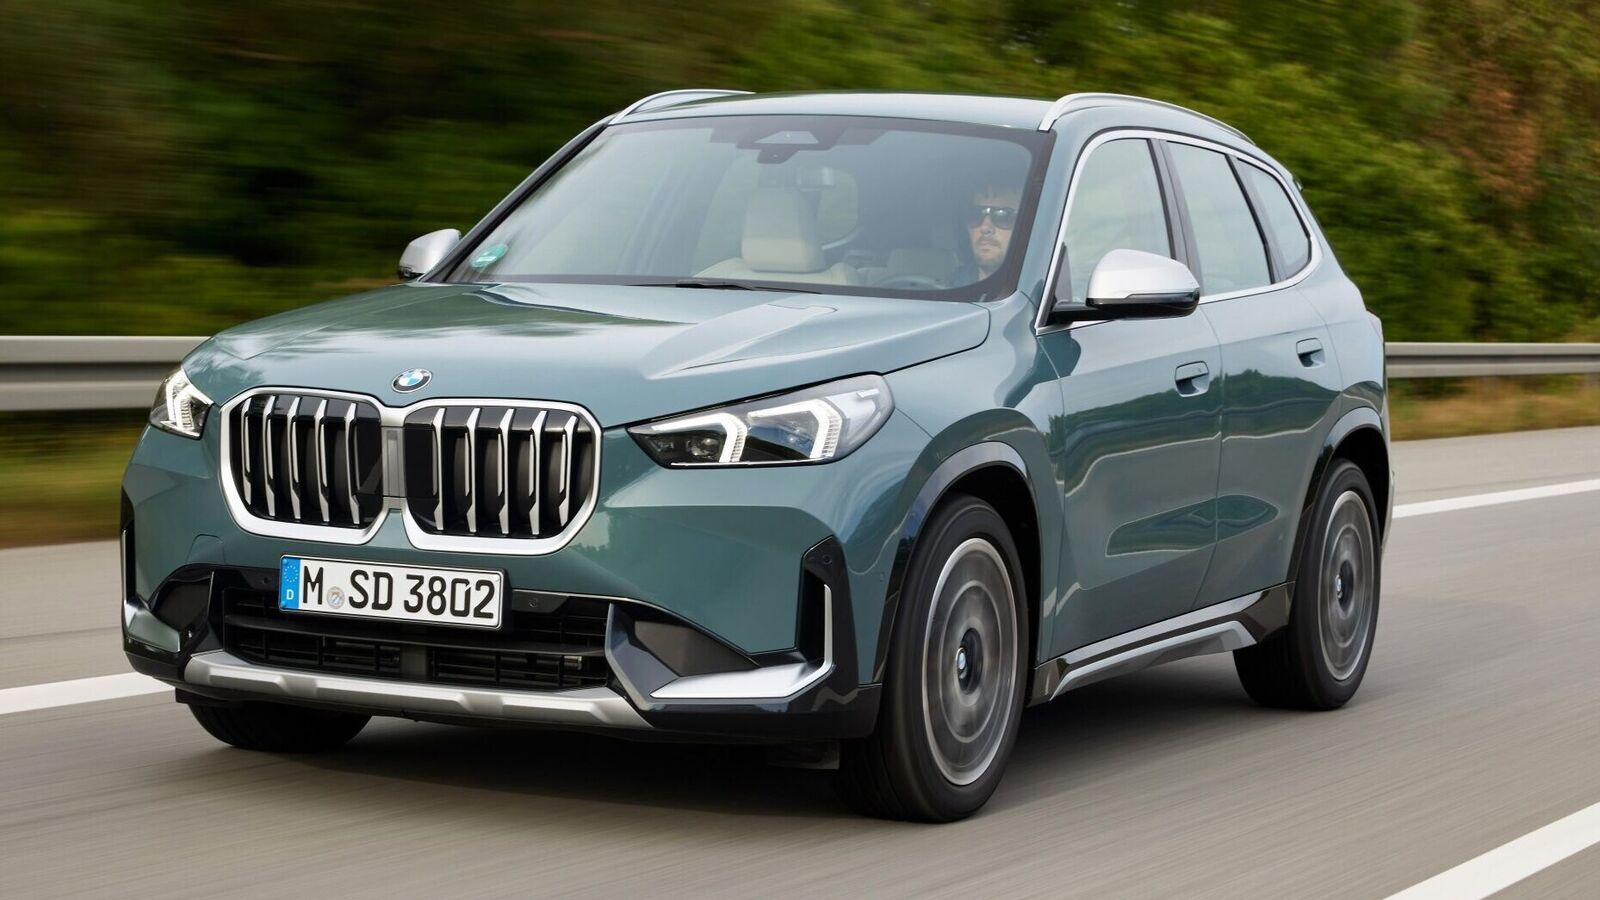 2020 BMW X1 Prices, Reviews, and Photos - MotorTrend